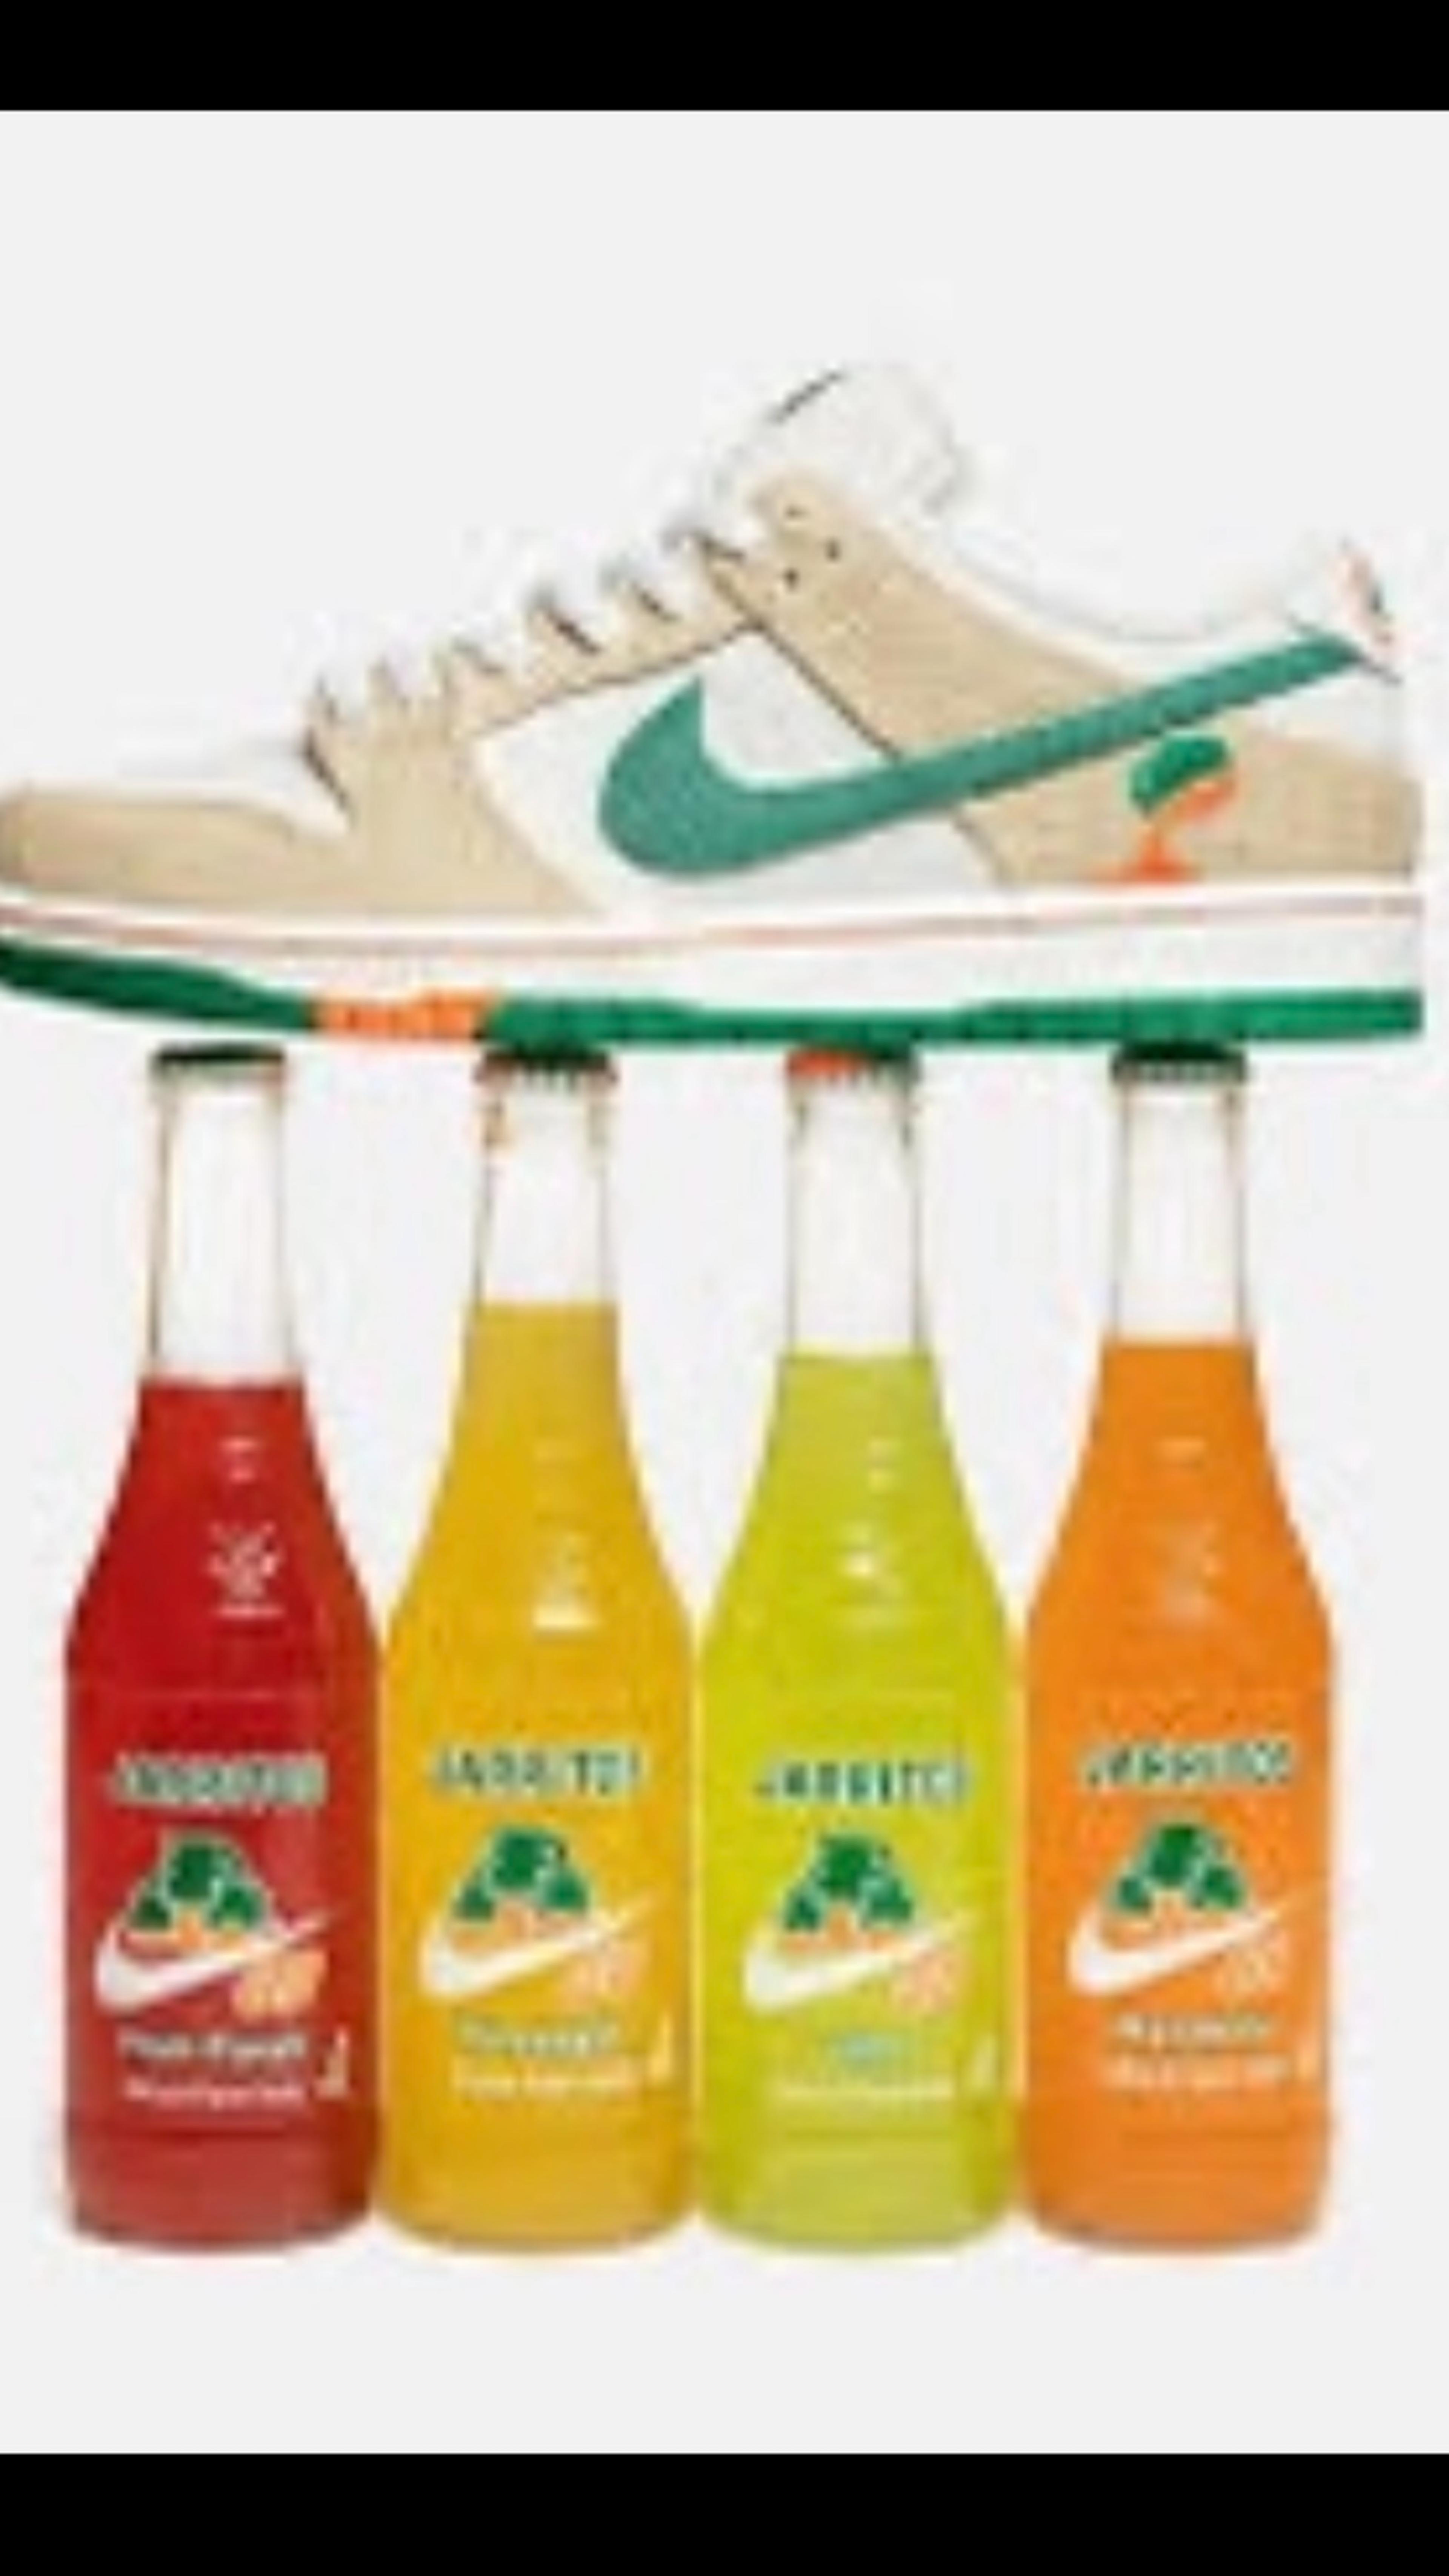 Preview image for the show titled "Mys Whl J4 SB PINE GREEN OR JARRITOS up to 11 & 2 SHOES & INSTAS" at May 3, 2024